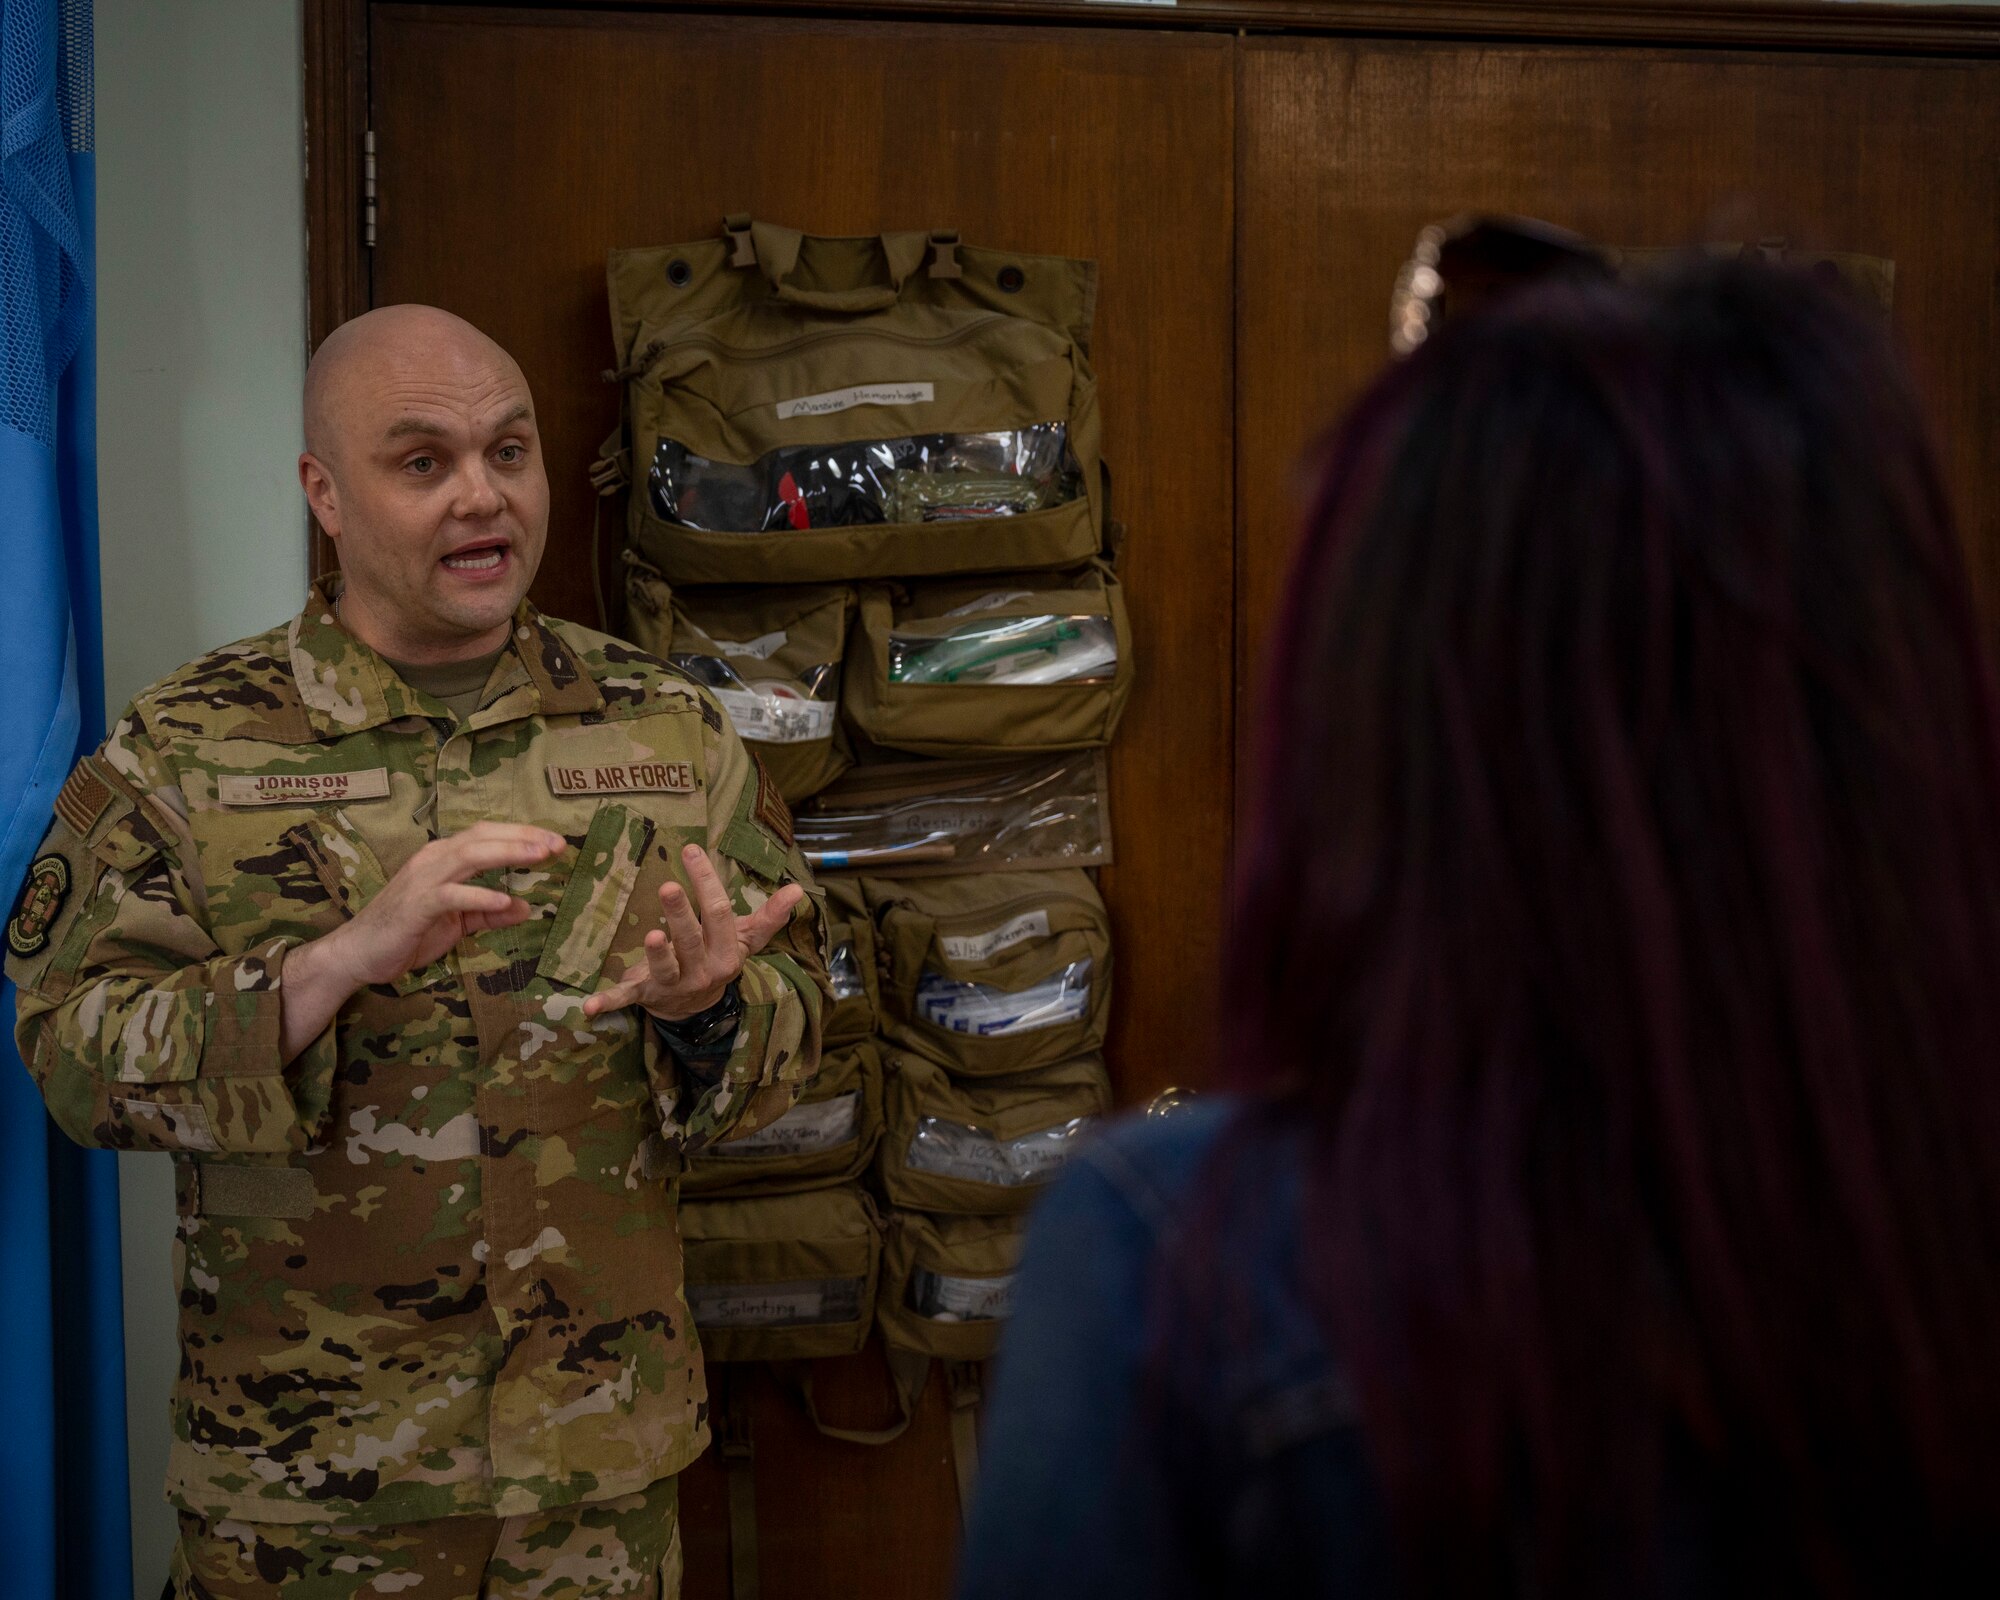 U.S. Air Force Maj. Jeremy Johnson, 386th Expeditionary Medical Squadron chief of medical staff, explains how Airmen take care of patients to Mai Alsoukari, Al Qabas journalist, at Ali Al Salem Air Base, Kuwait, March 21, 2023.